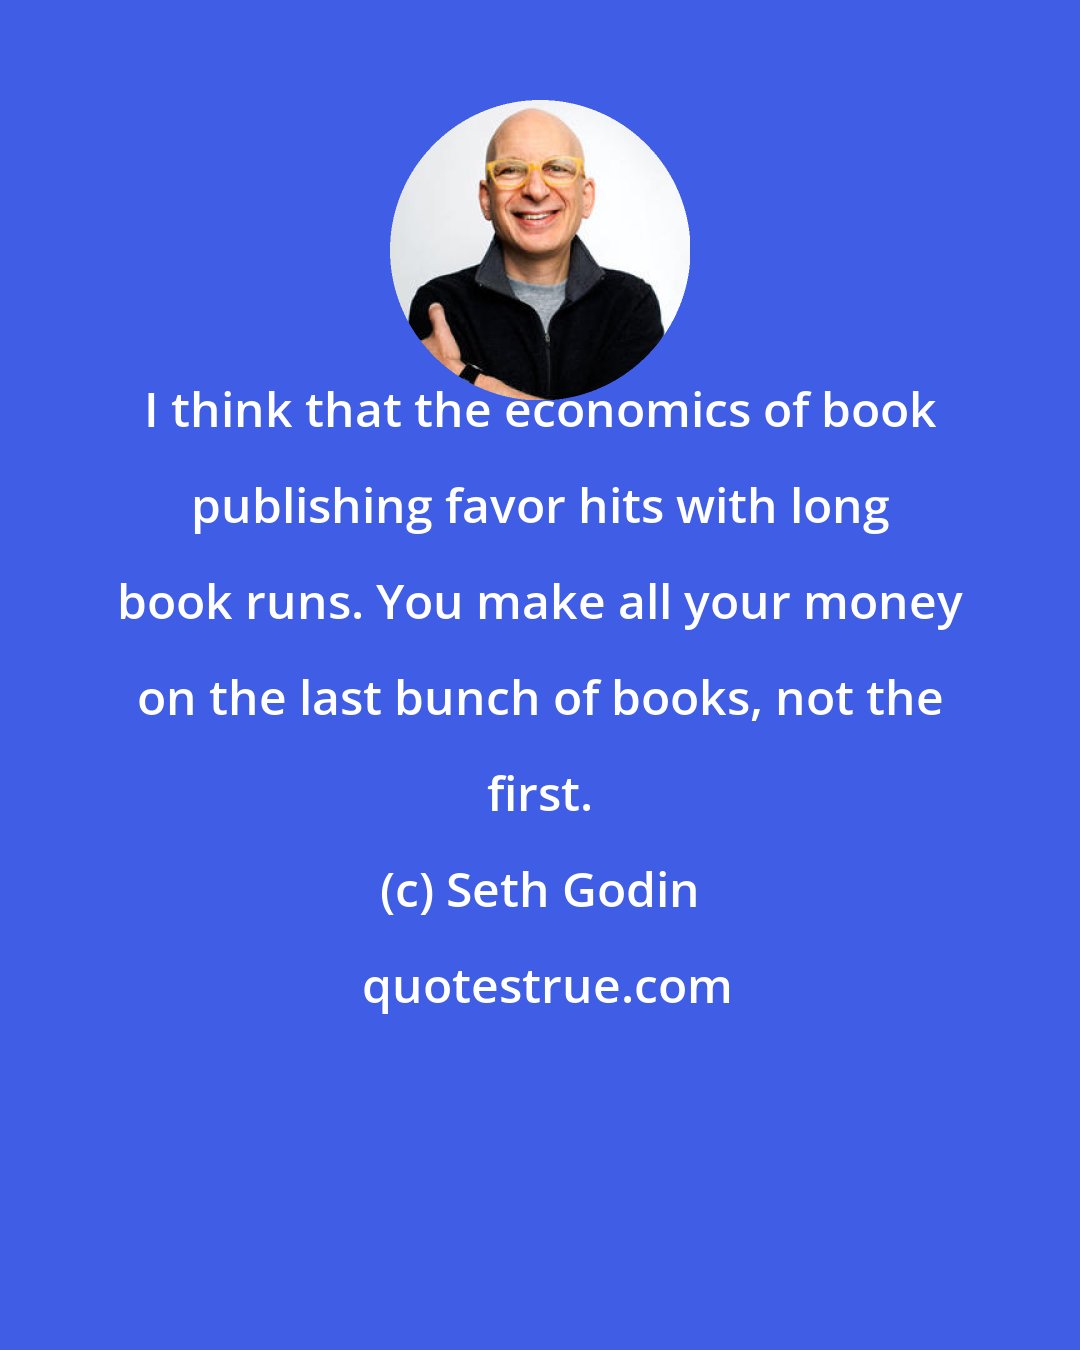 Seth Godin: I think that the economics of book publishing favor hits with long book runs. You make all your money on the last bunch of books, not the first.